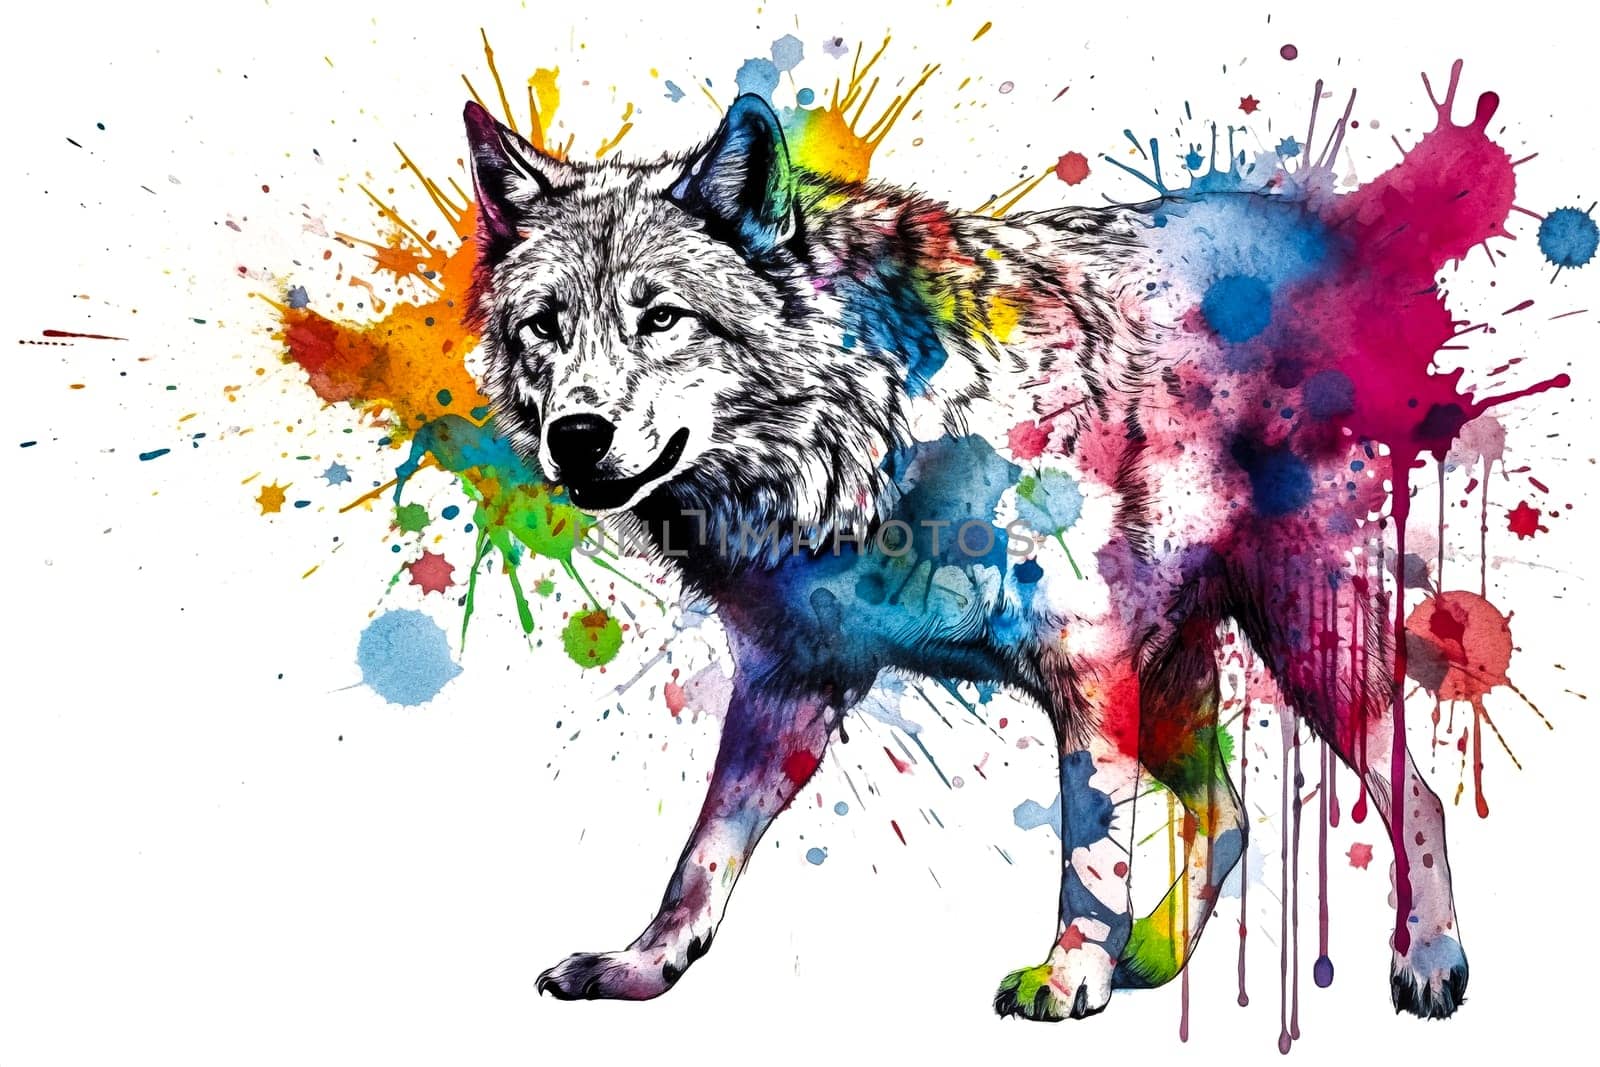 Illustration showcasing a wolf blending with watercolor textures ai by Alla_Morozova93